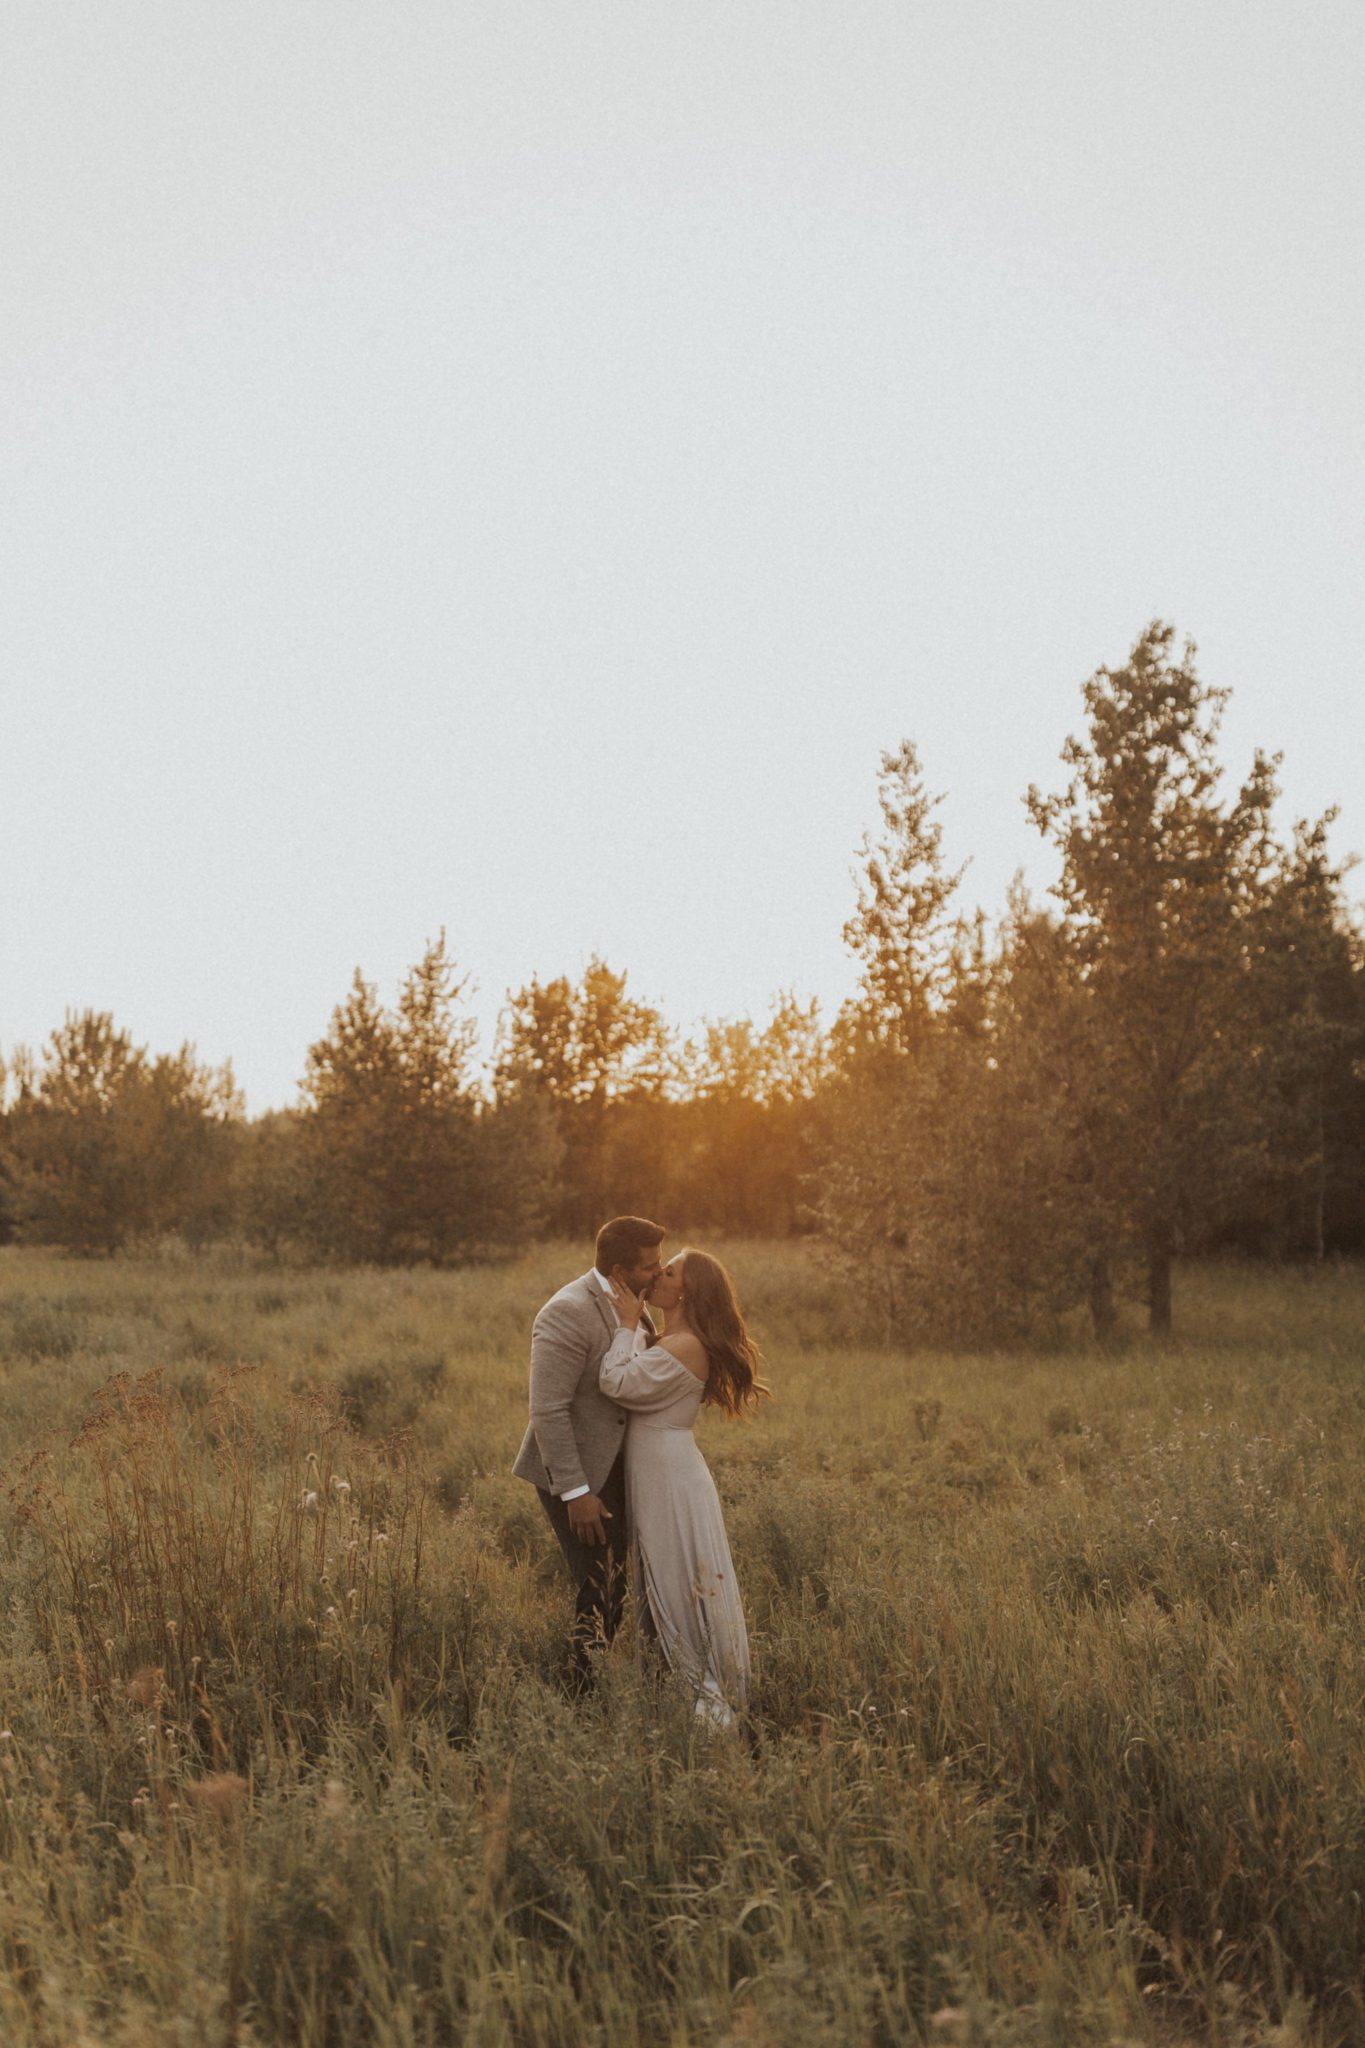 Dreamy and romantic engagement session in a sunset field